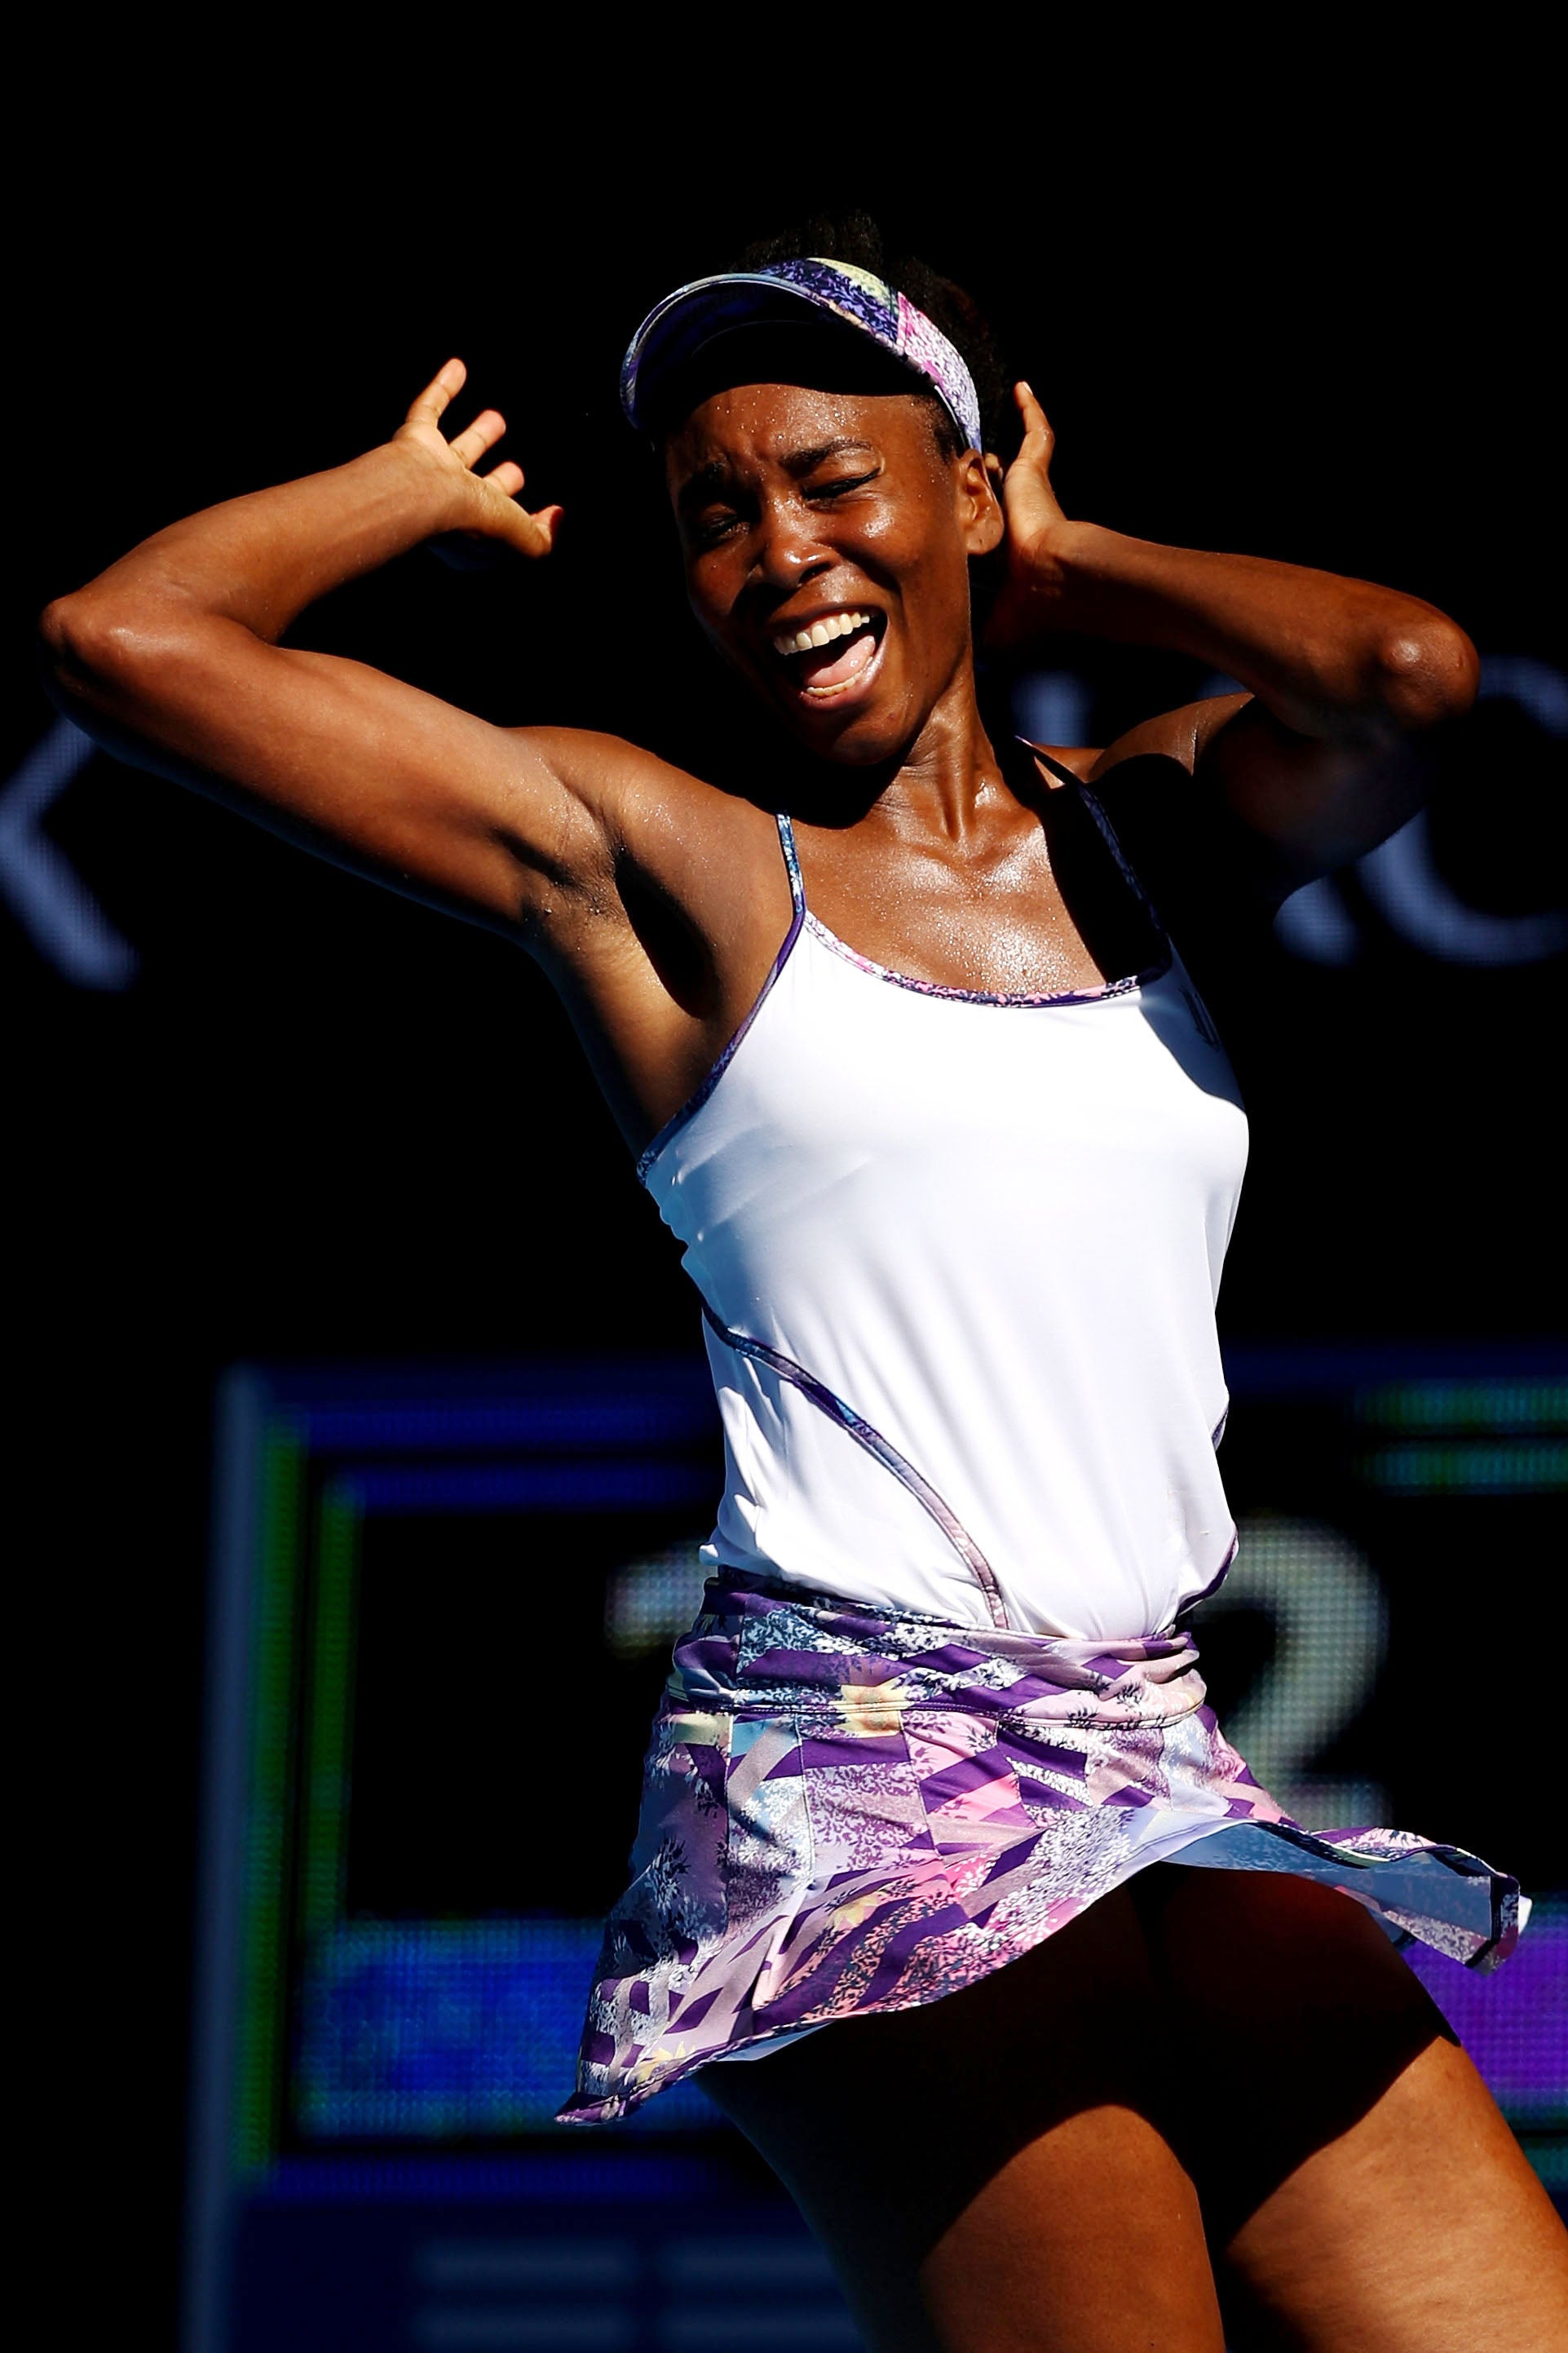 Venus Williams’ Amazing Reaction To Advancing In The Australian Open Is Everything!
